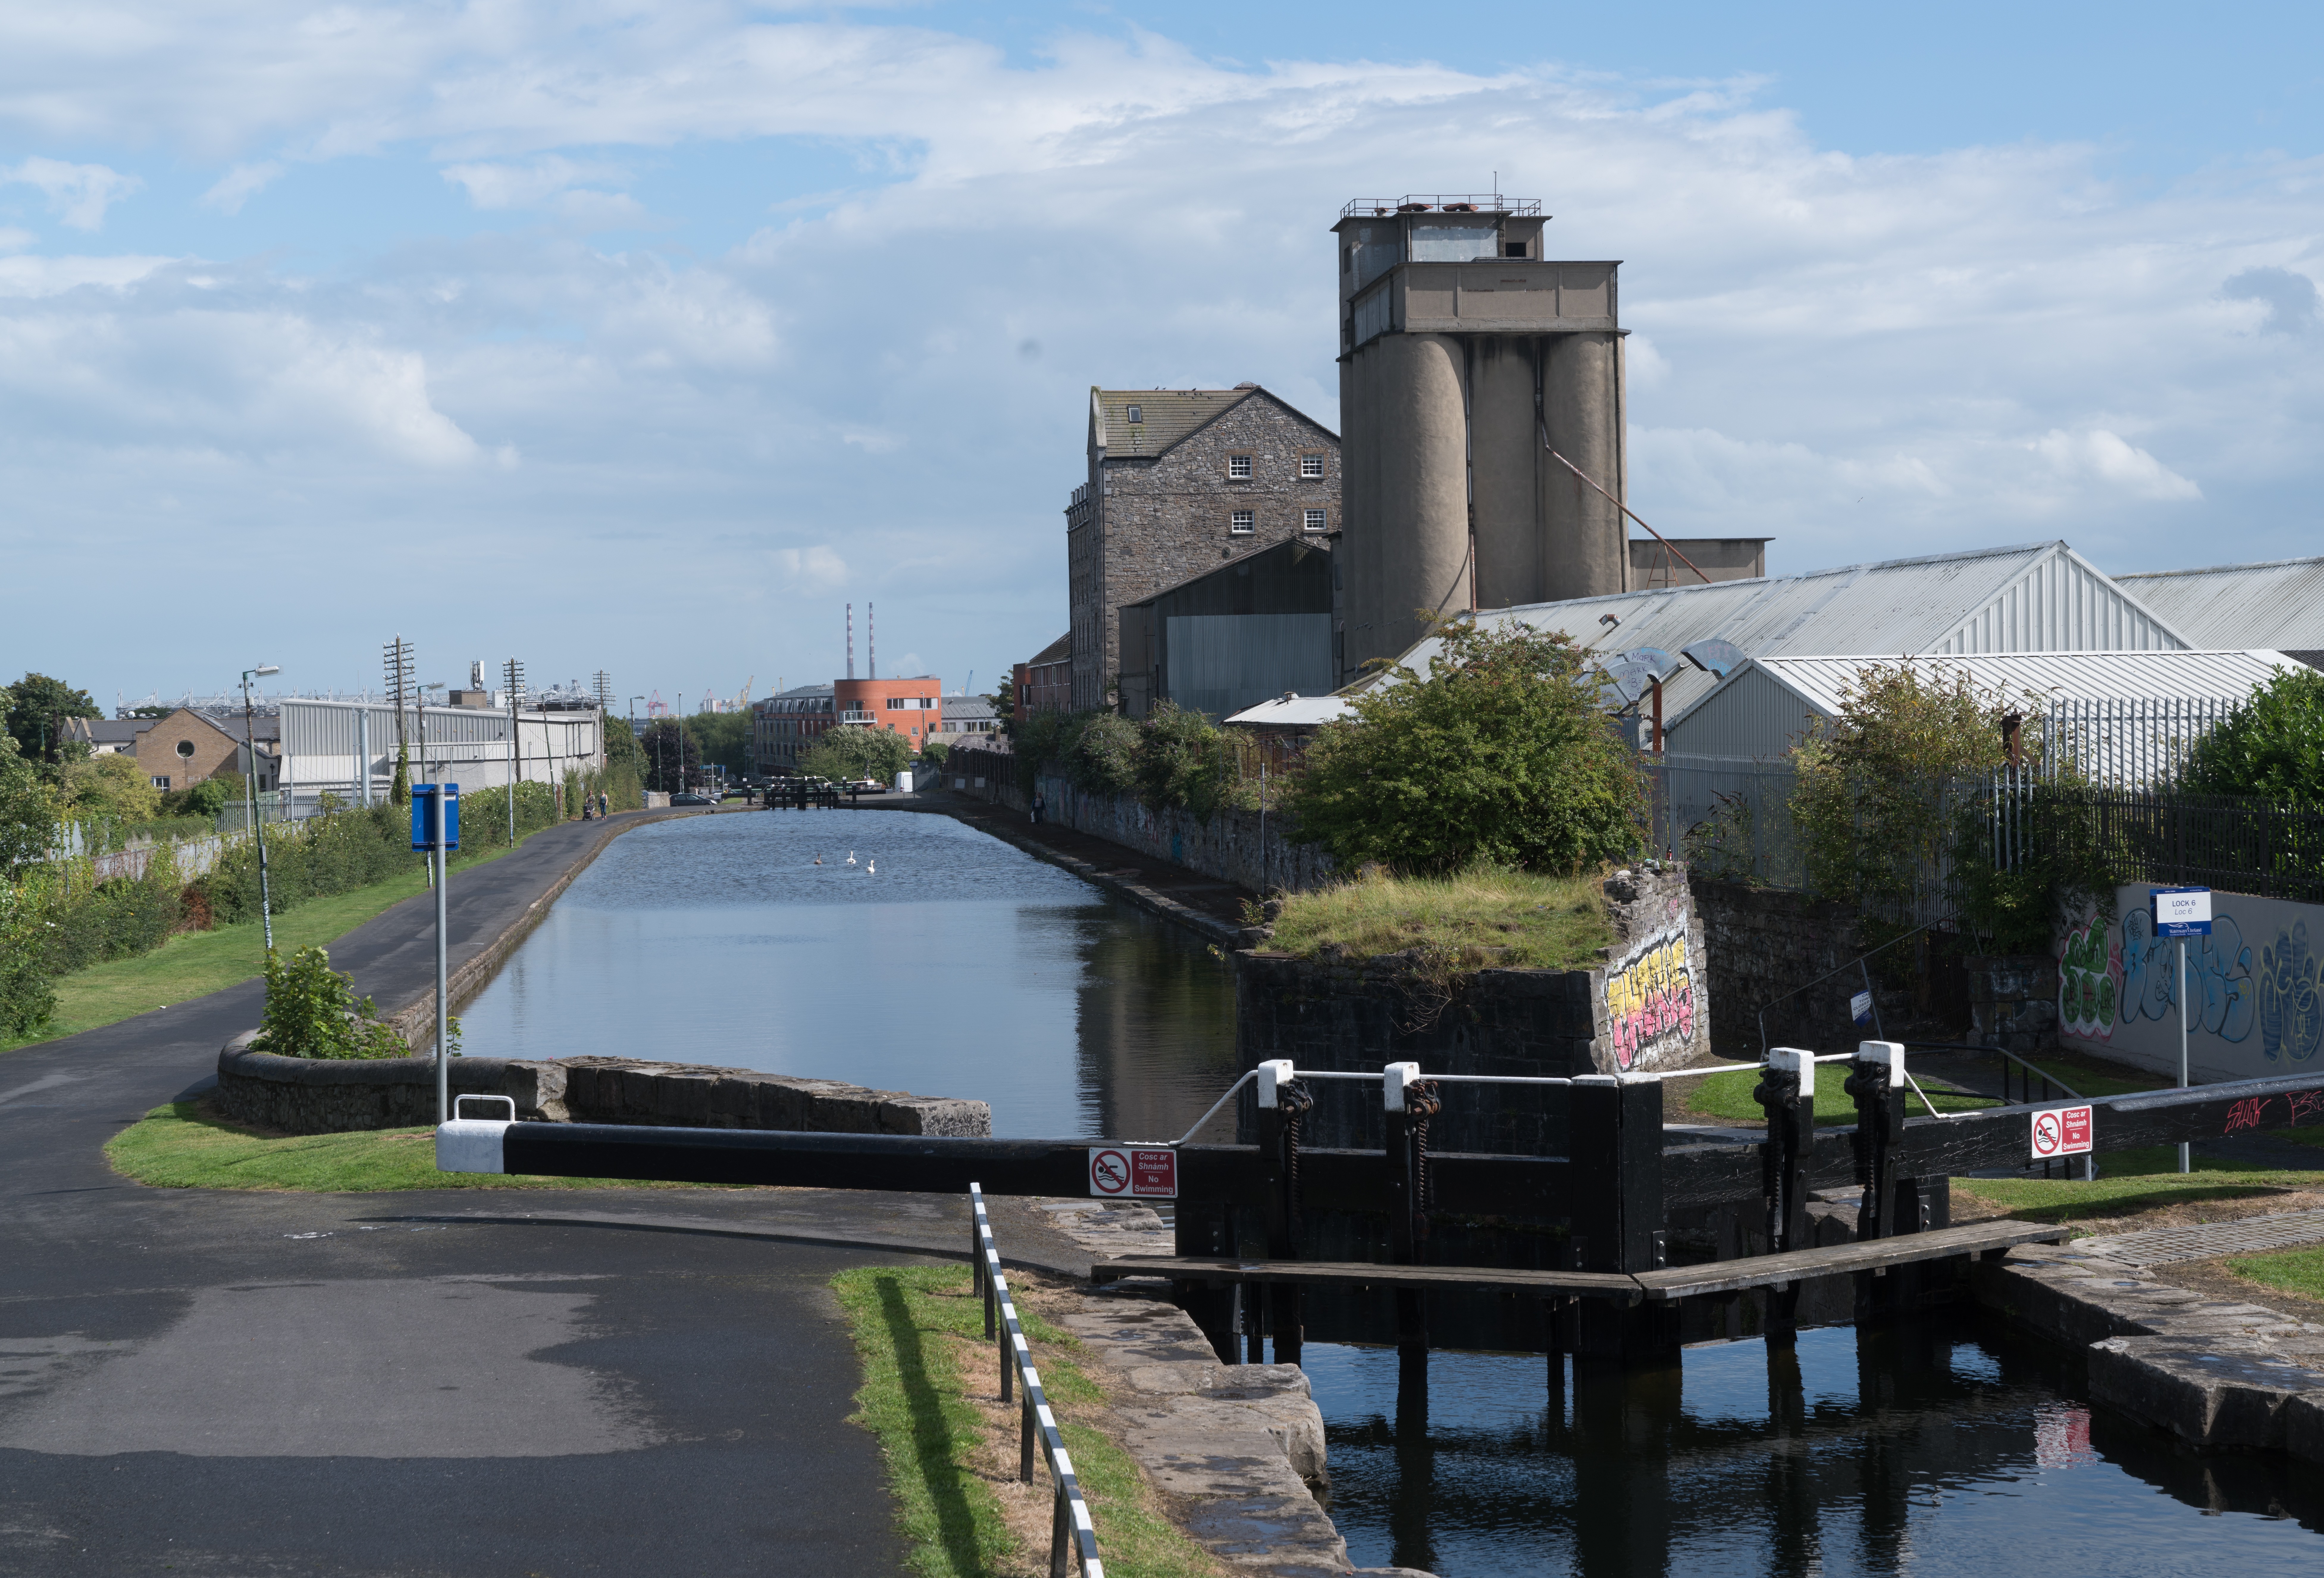  ROYAL CANAL - CABRA AREA 009 